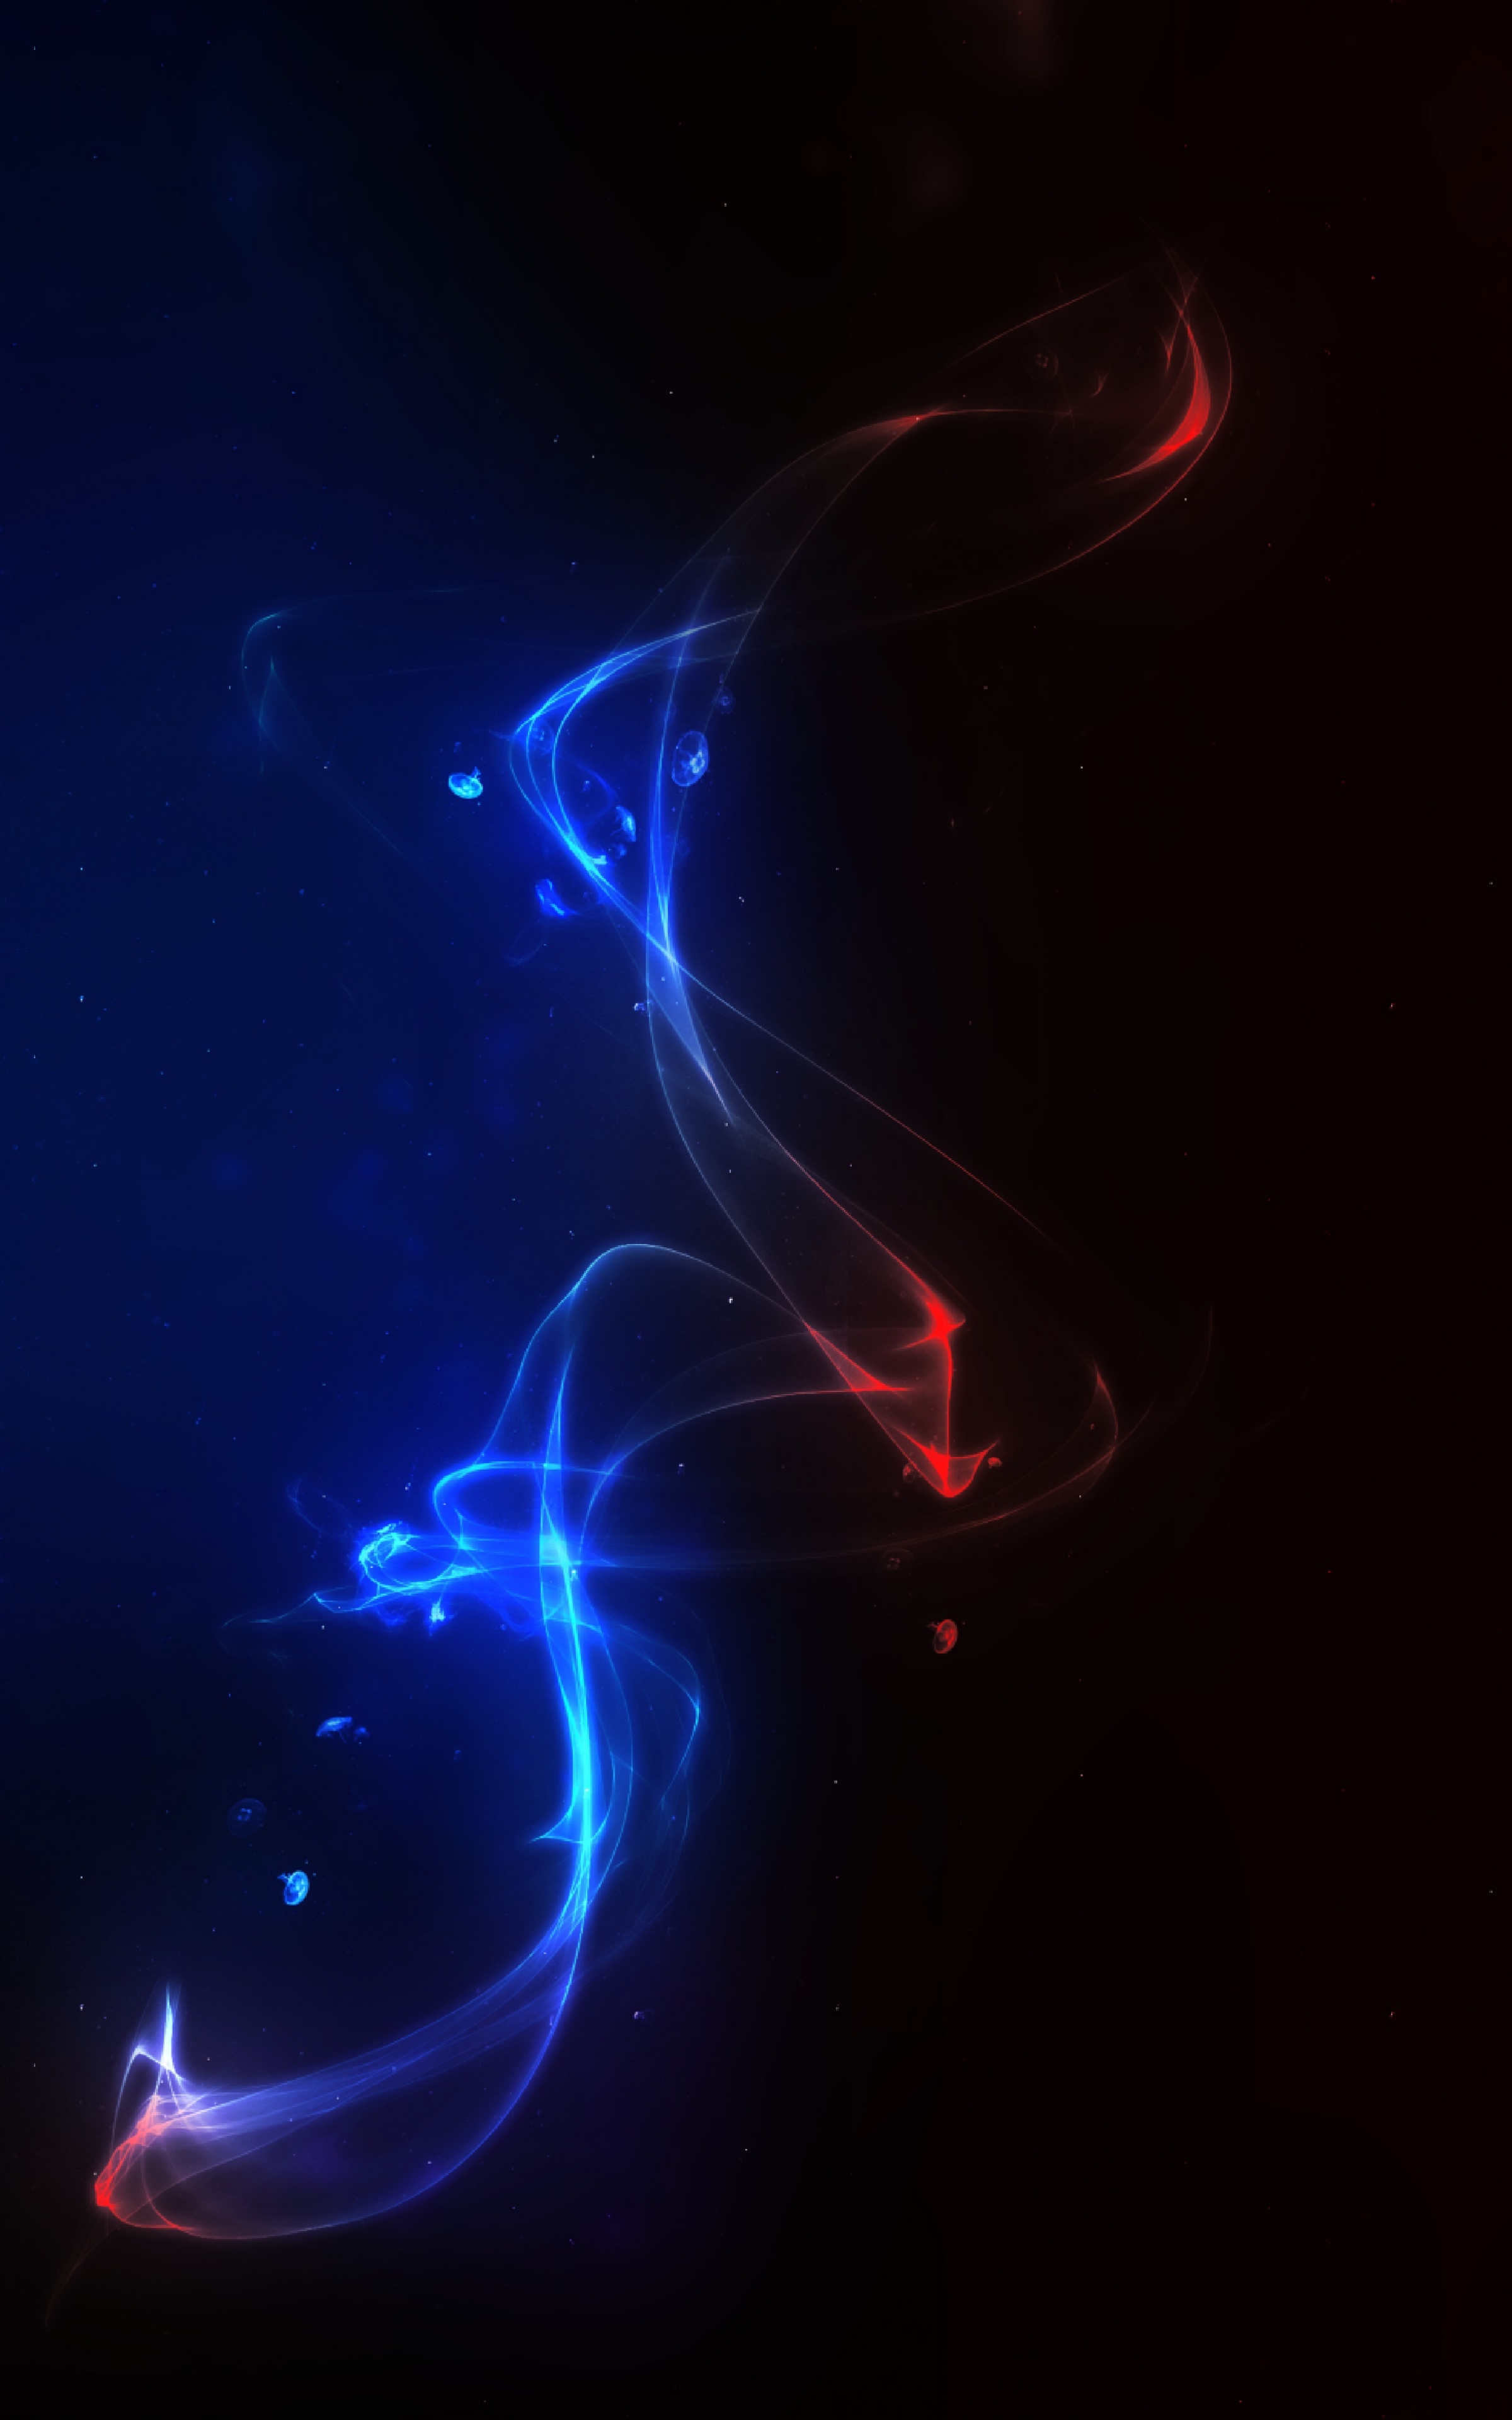 glow, energy, abstract, blue, red FHD, 4K, UHD